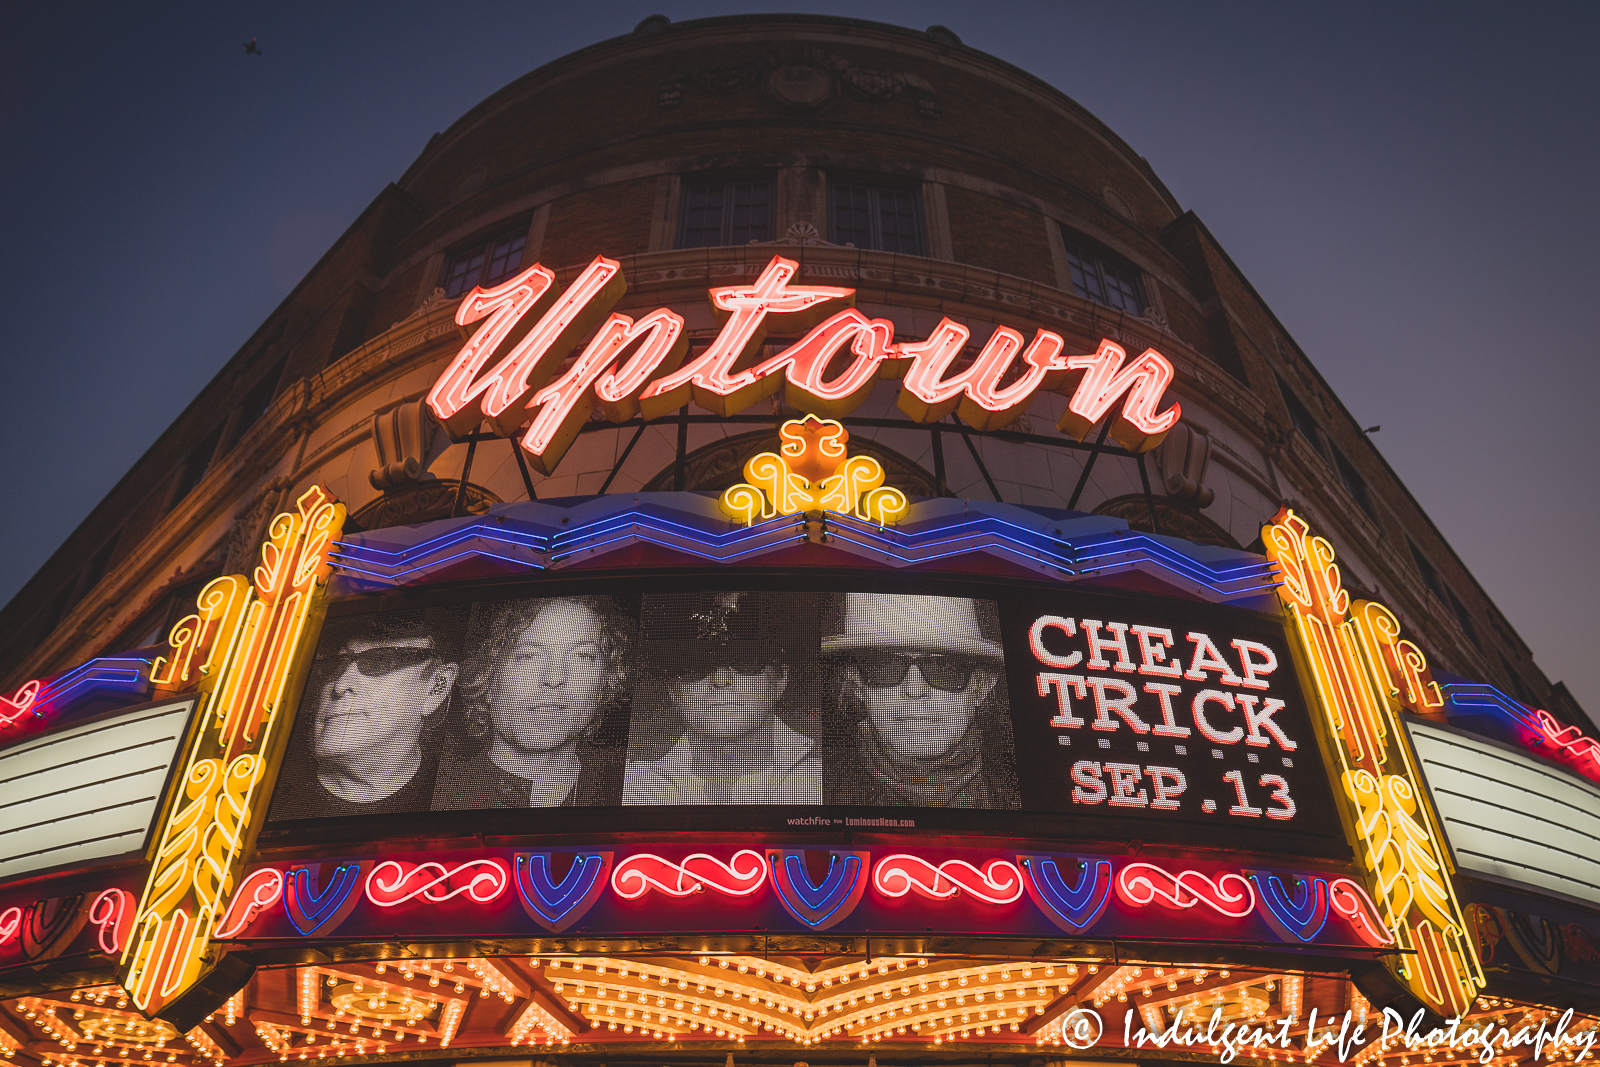 Marquee at Uptown Theater in Kansas City, MO featuring Cheap Trick on September 13, 2022.